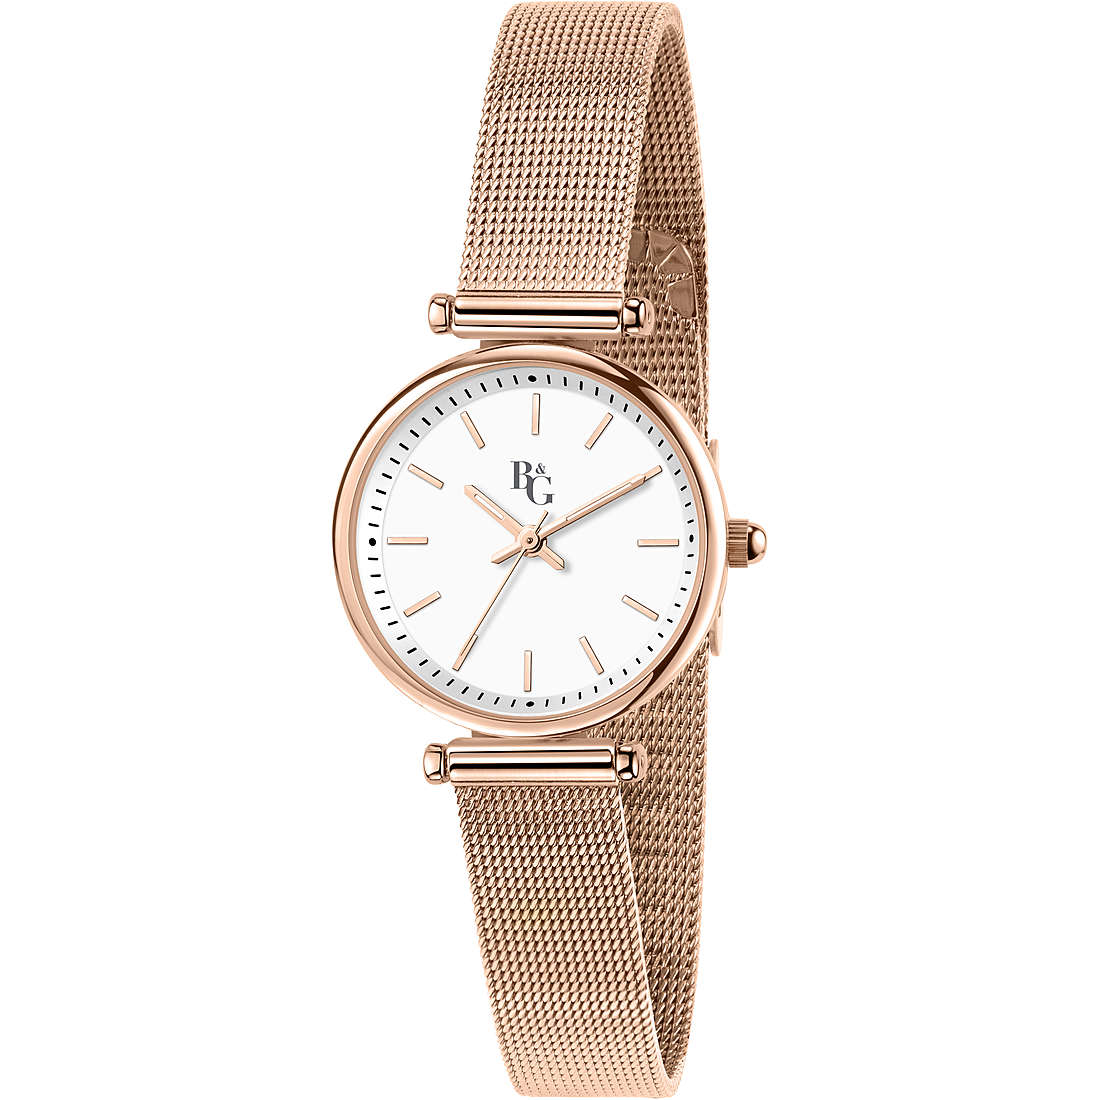 only time watch Metal White dial woman Belle R3853302503